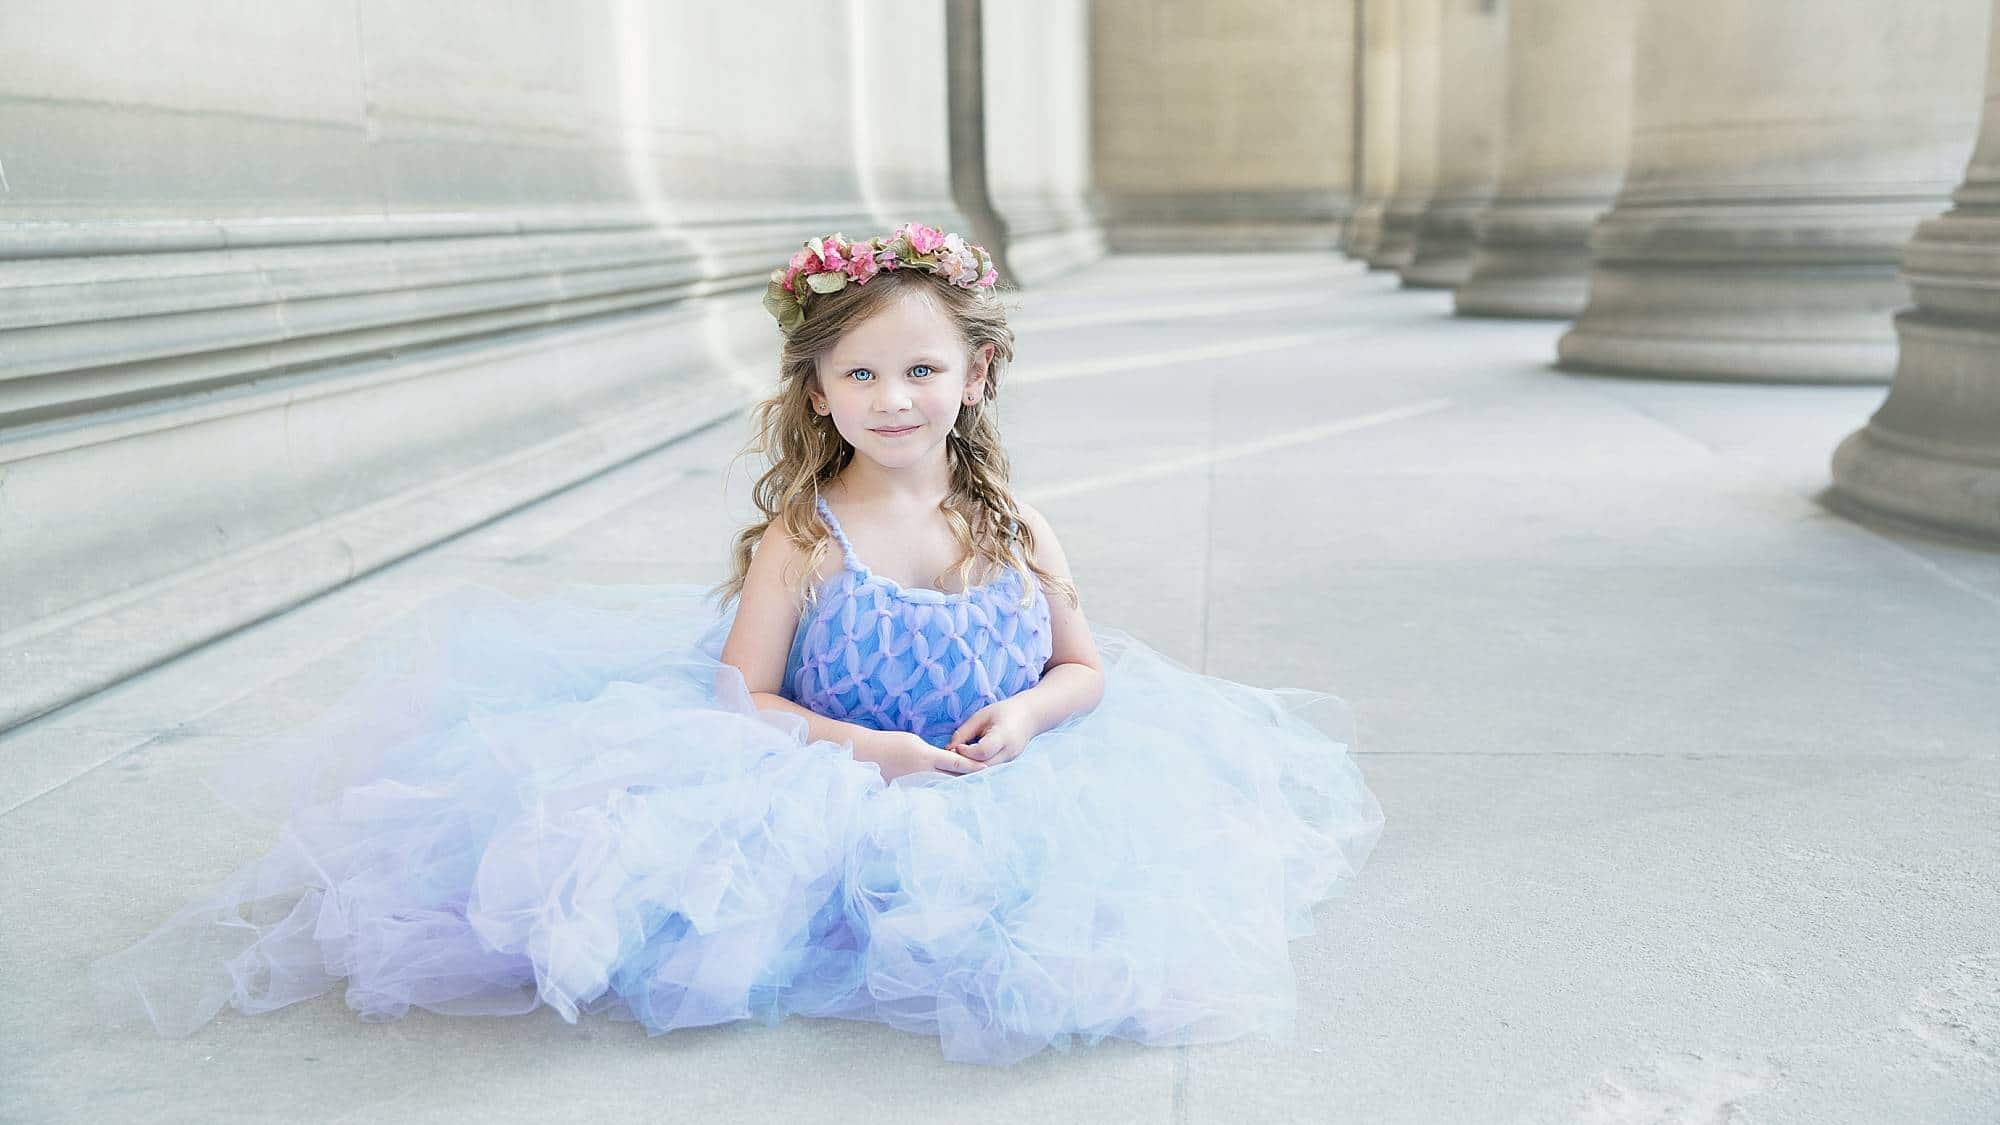 image of a little girl, sitting in a marble hall with columns wearing a light blue tulle dress